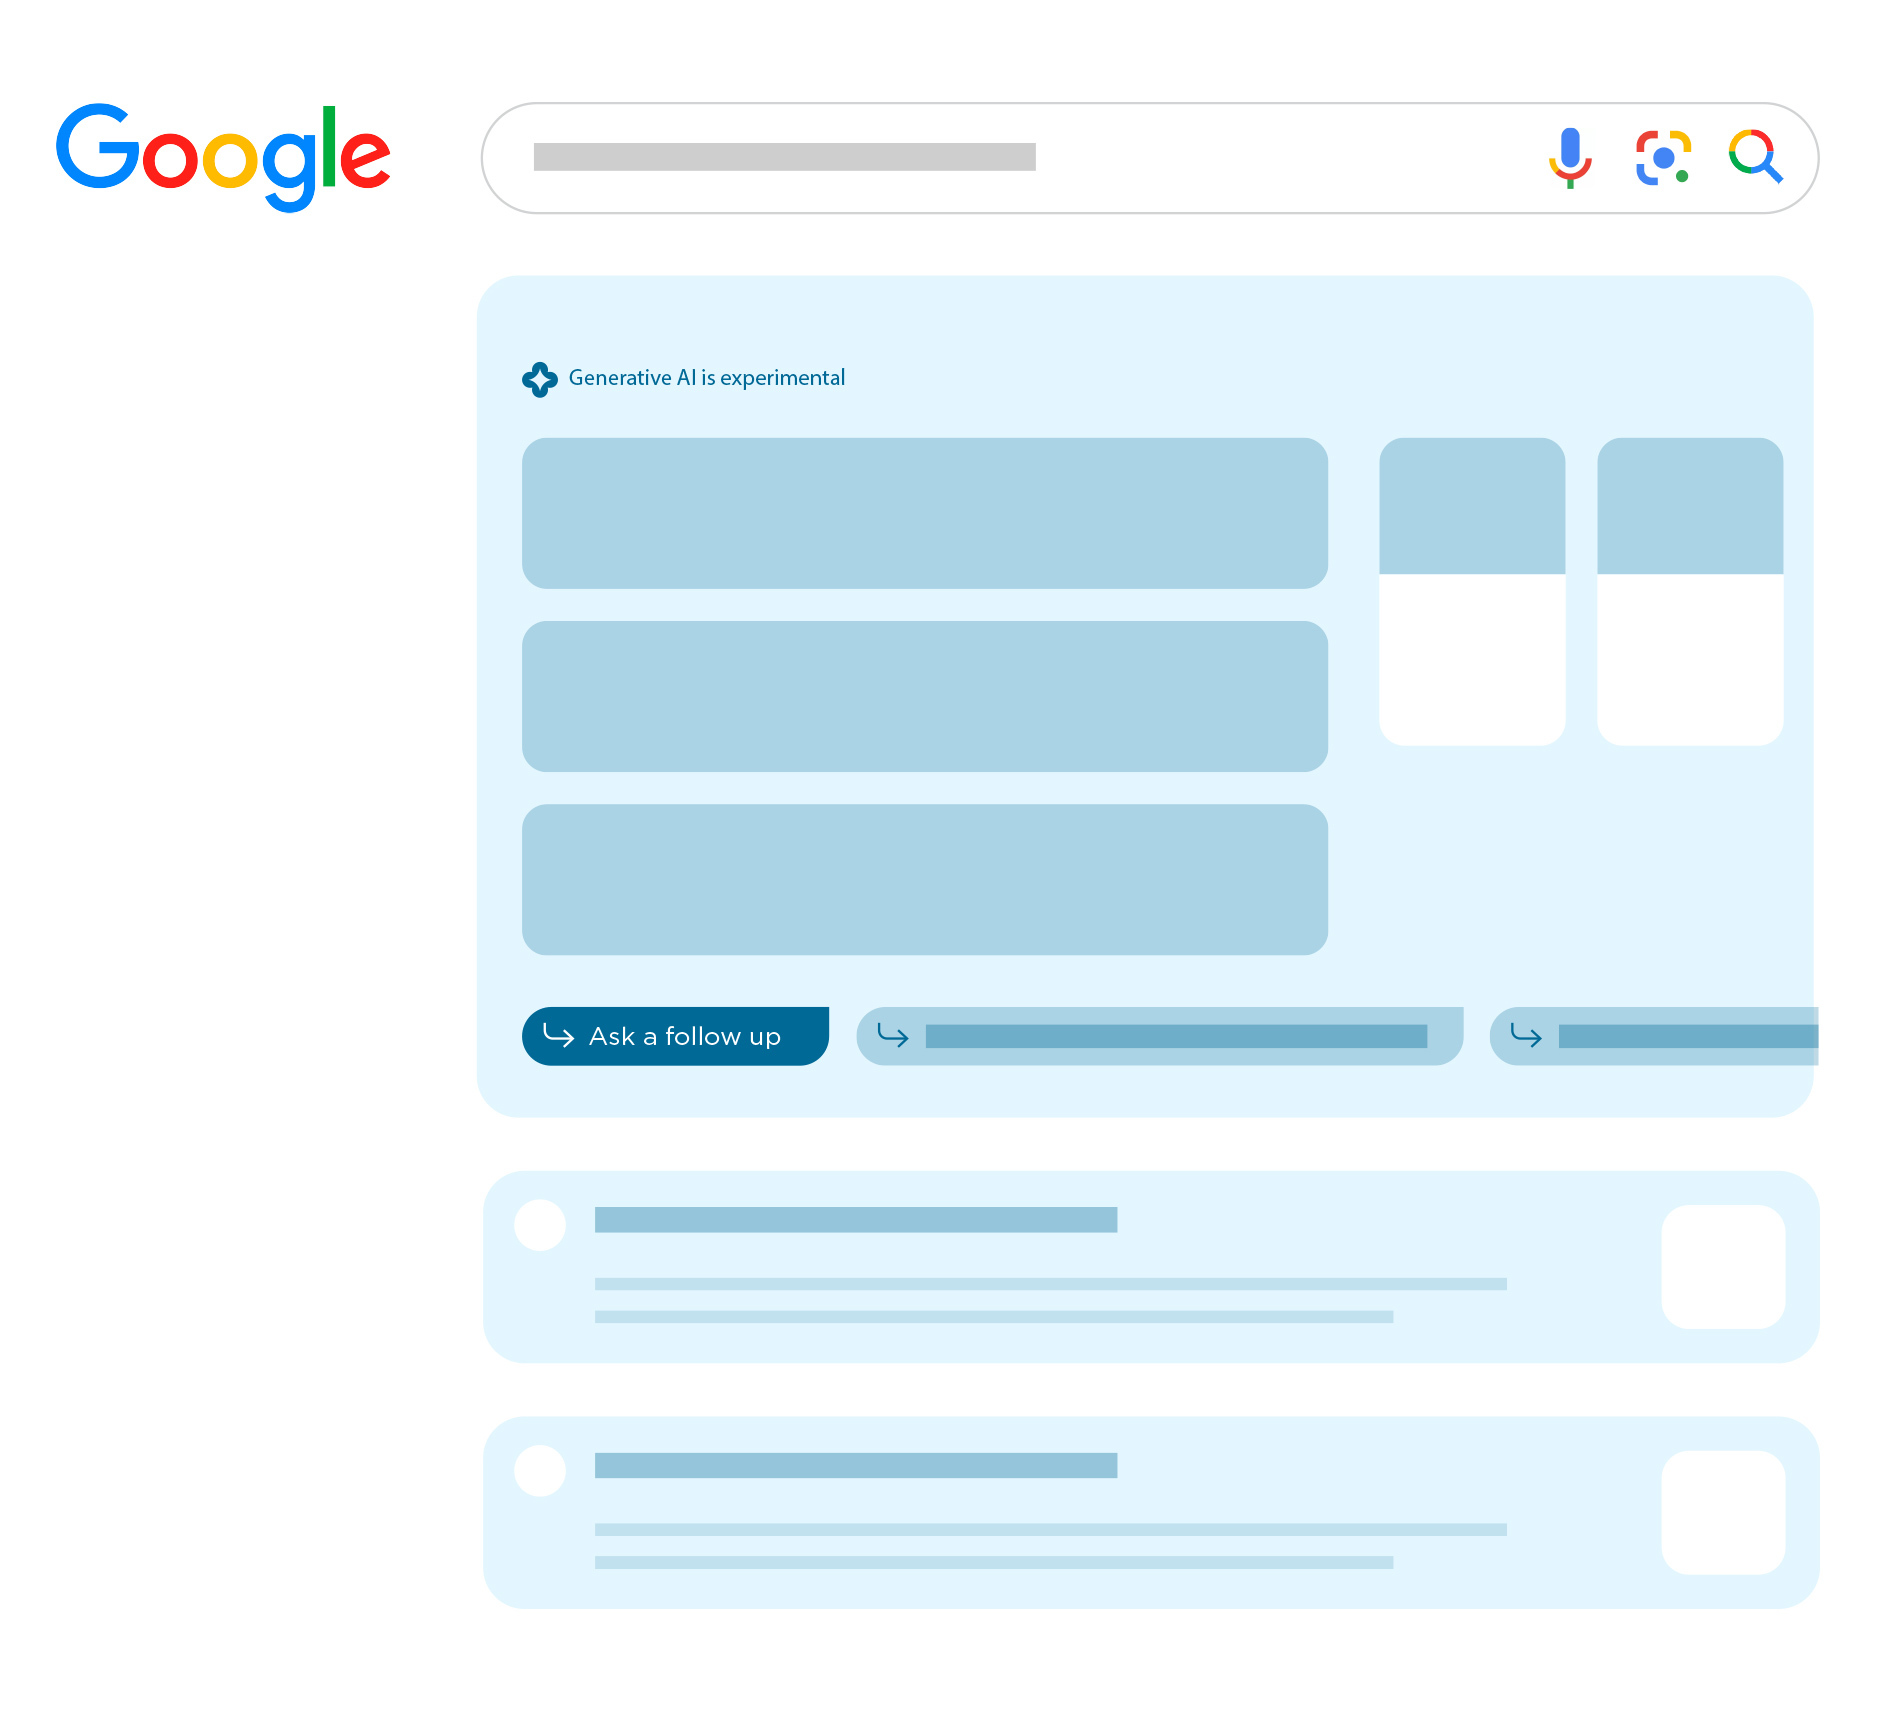 An illustration of the Google AI search interface. There is a Google search bar at the top, and underneath this it says Generative AI is experimental. There is an option underneath that to ask a follow-up.